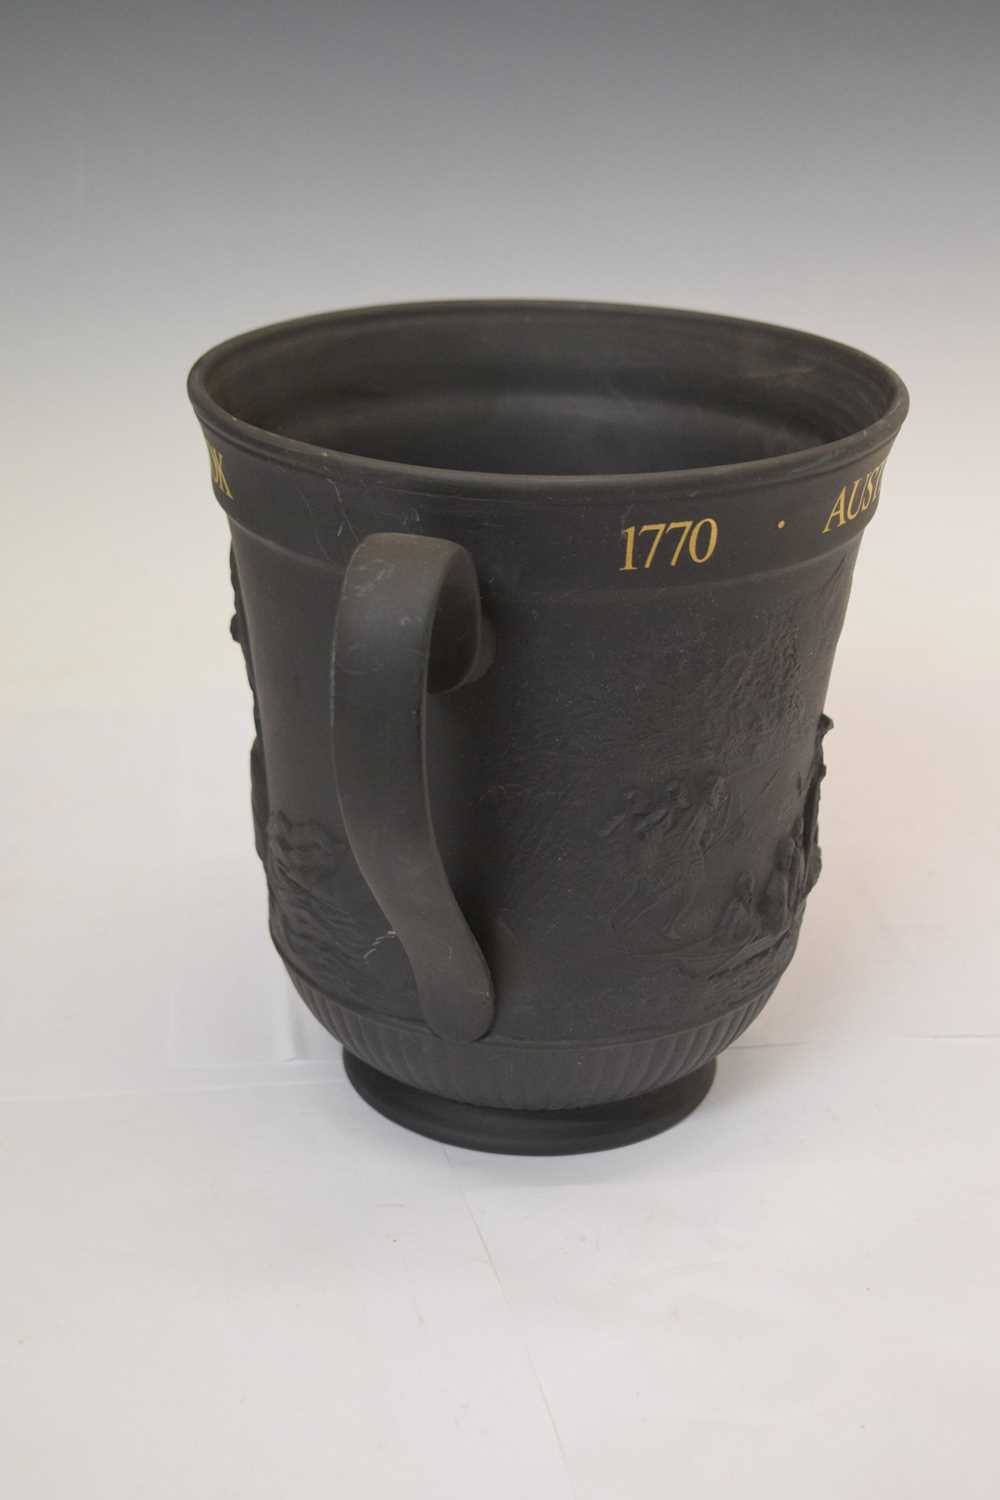 Royal Doulton - Black basalt limited edition Captain Cook Bicentenary loving cup - Image 4 of 6